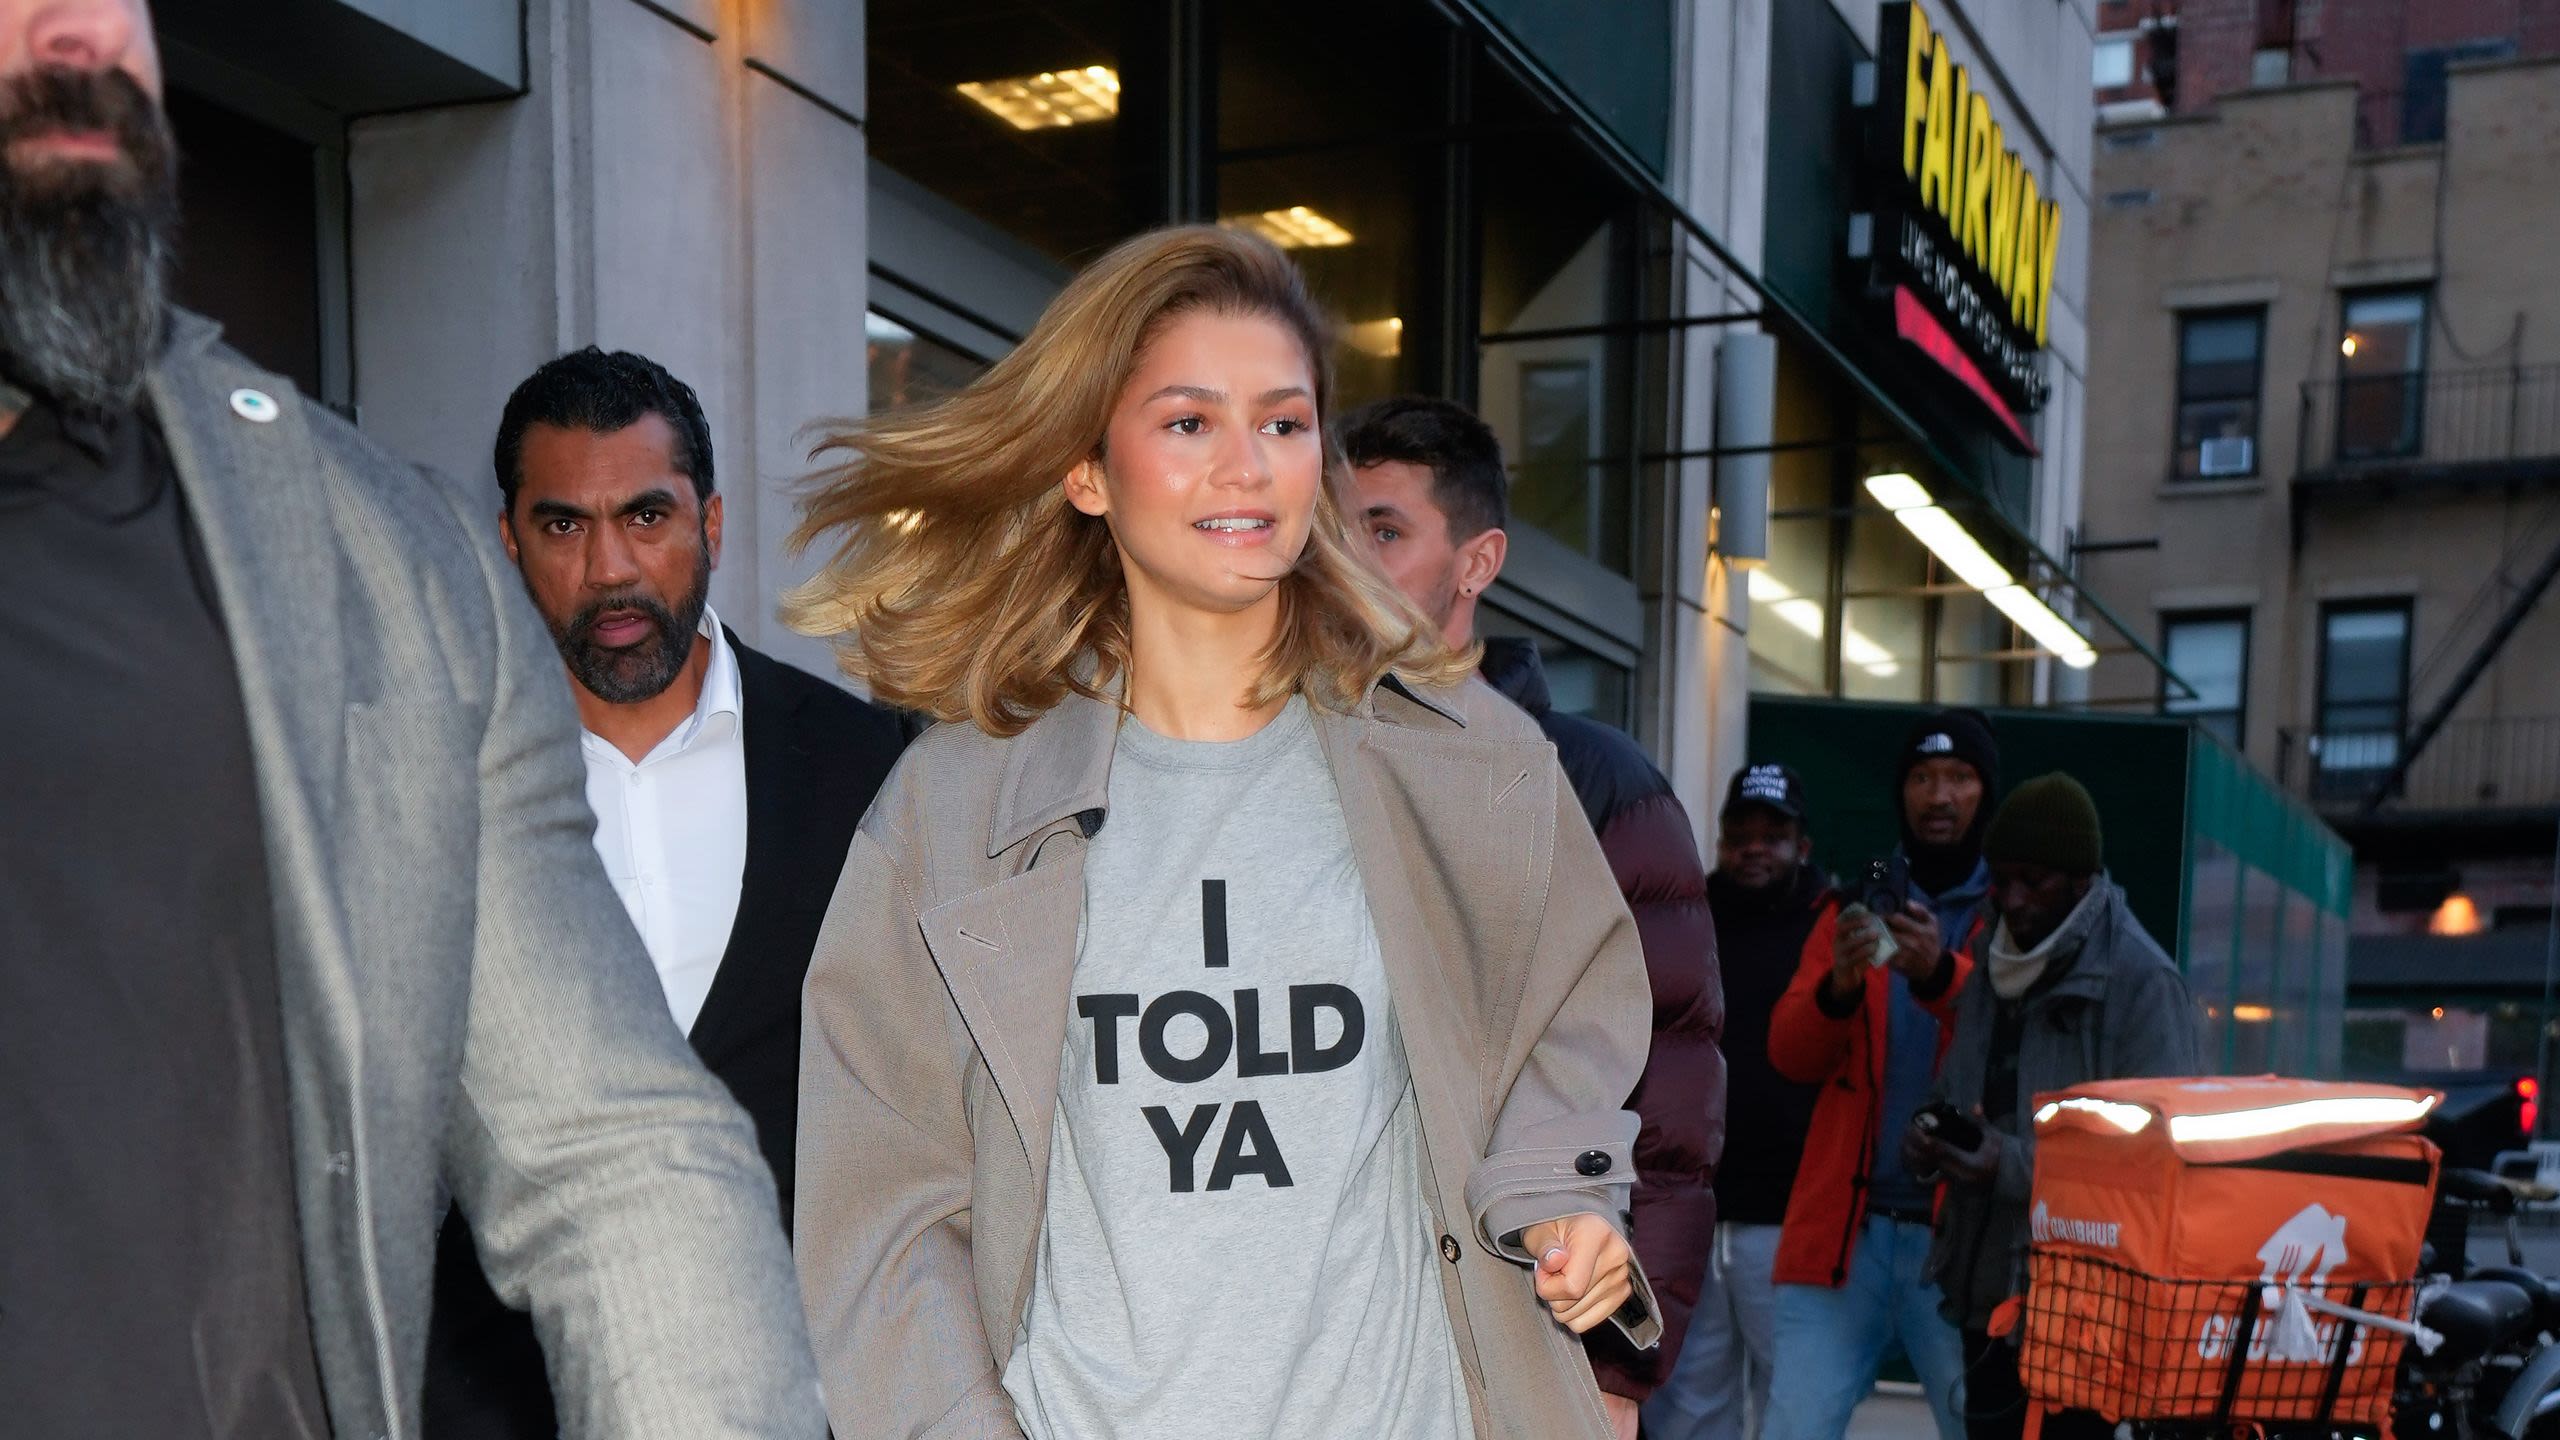 Loewe’s “I Told Ya” Tee is So Right for This Moment in Women’s Sports